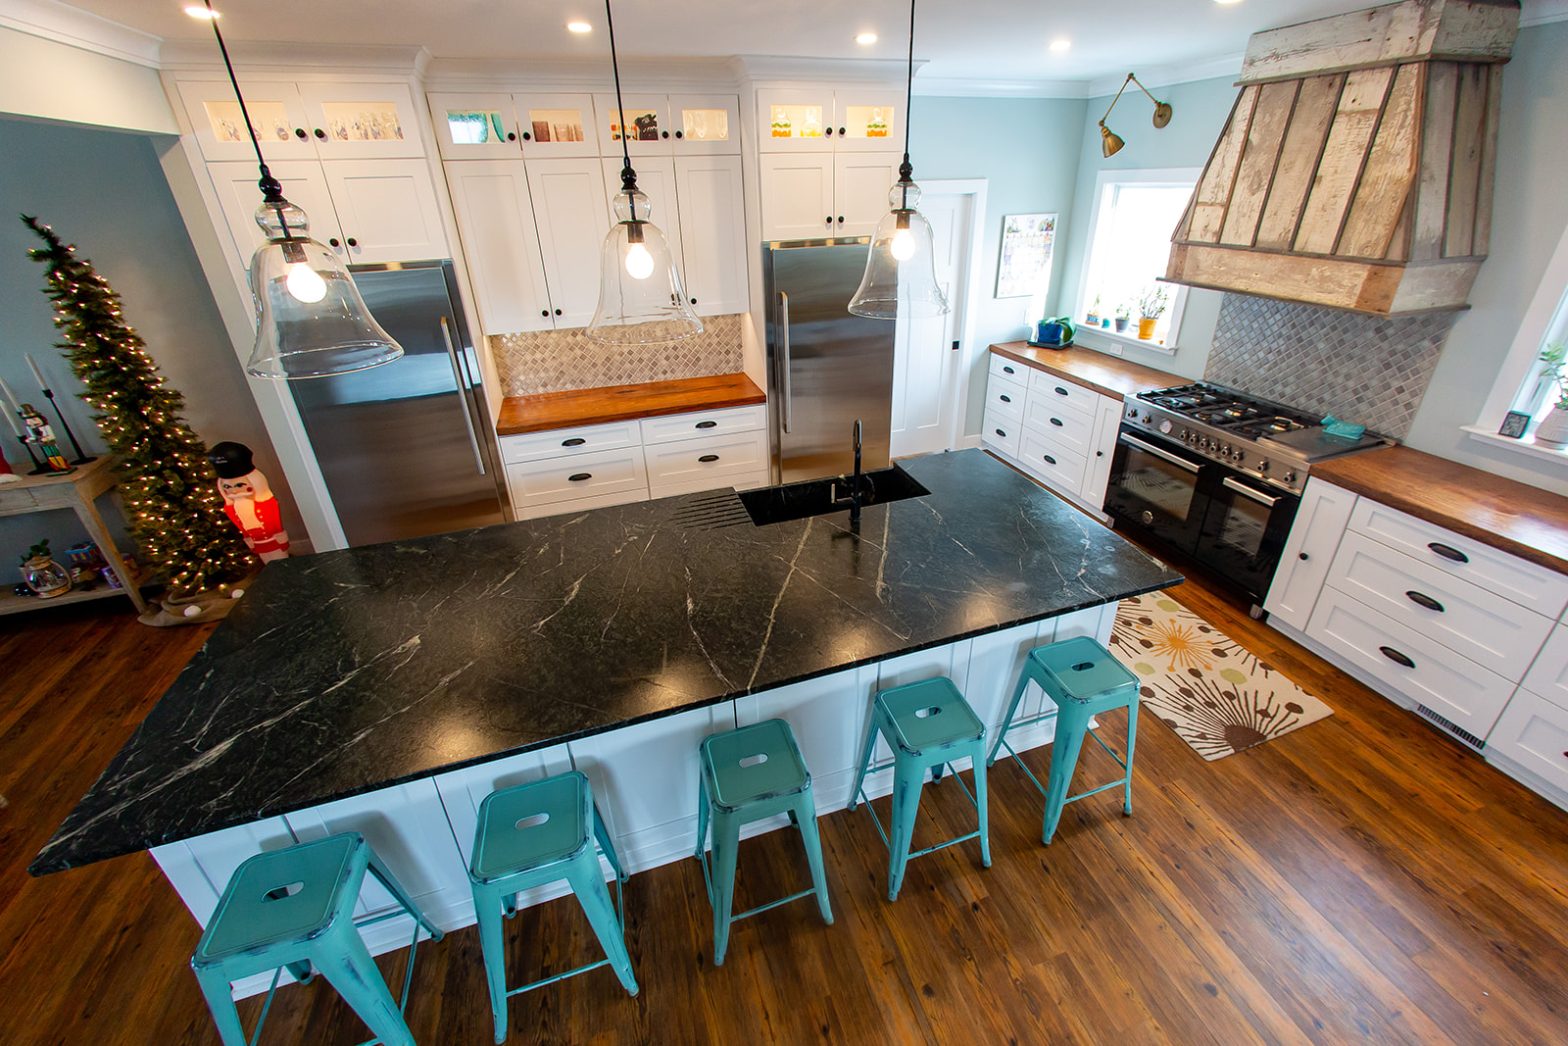 Mango Wood kitchen countertop & Pacific Soapstone with runnels